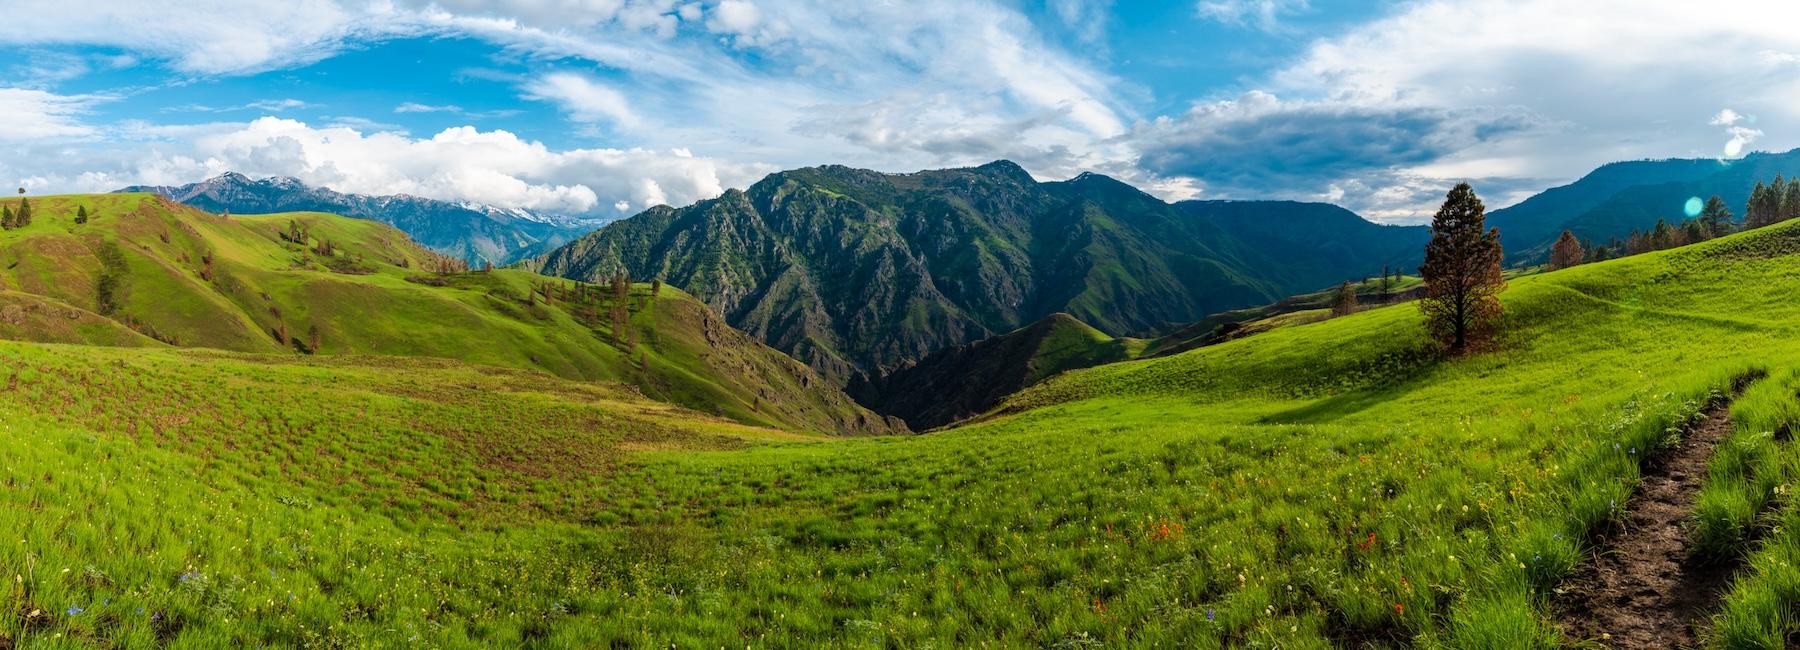 Panoramic views of Bear Mountain from the Bench Trail in Hells Canyon